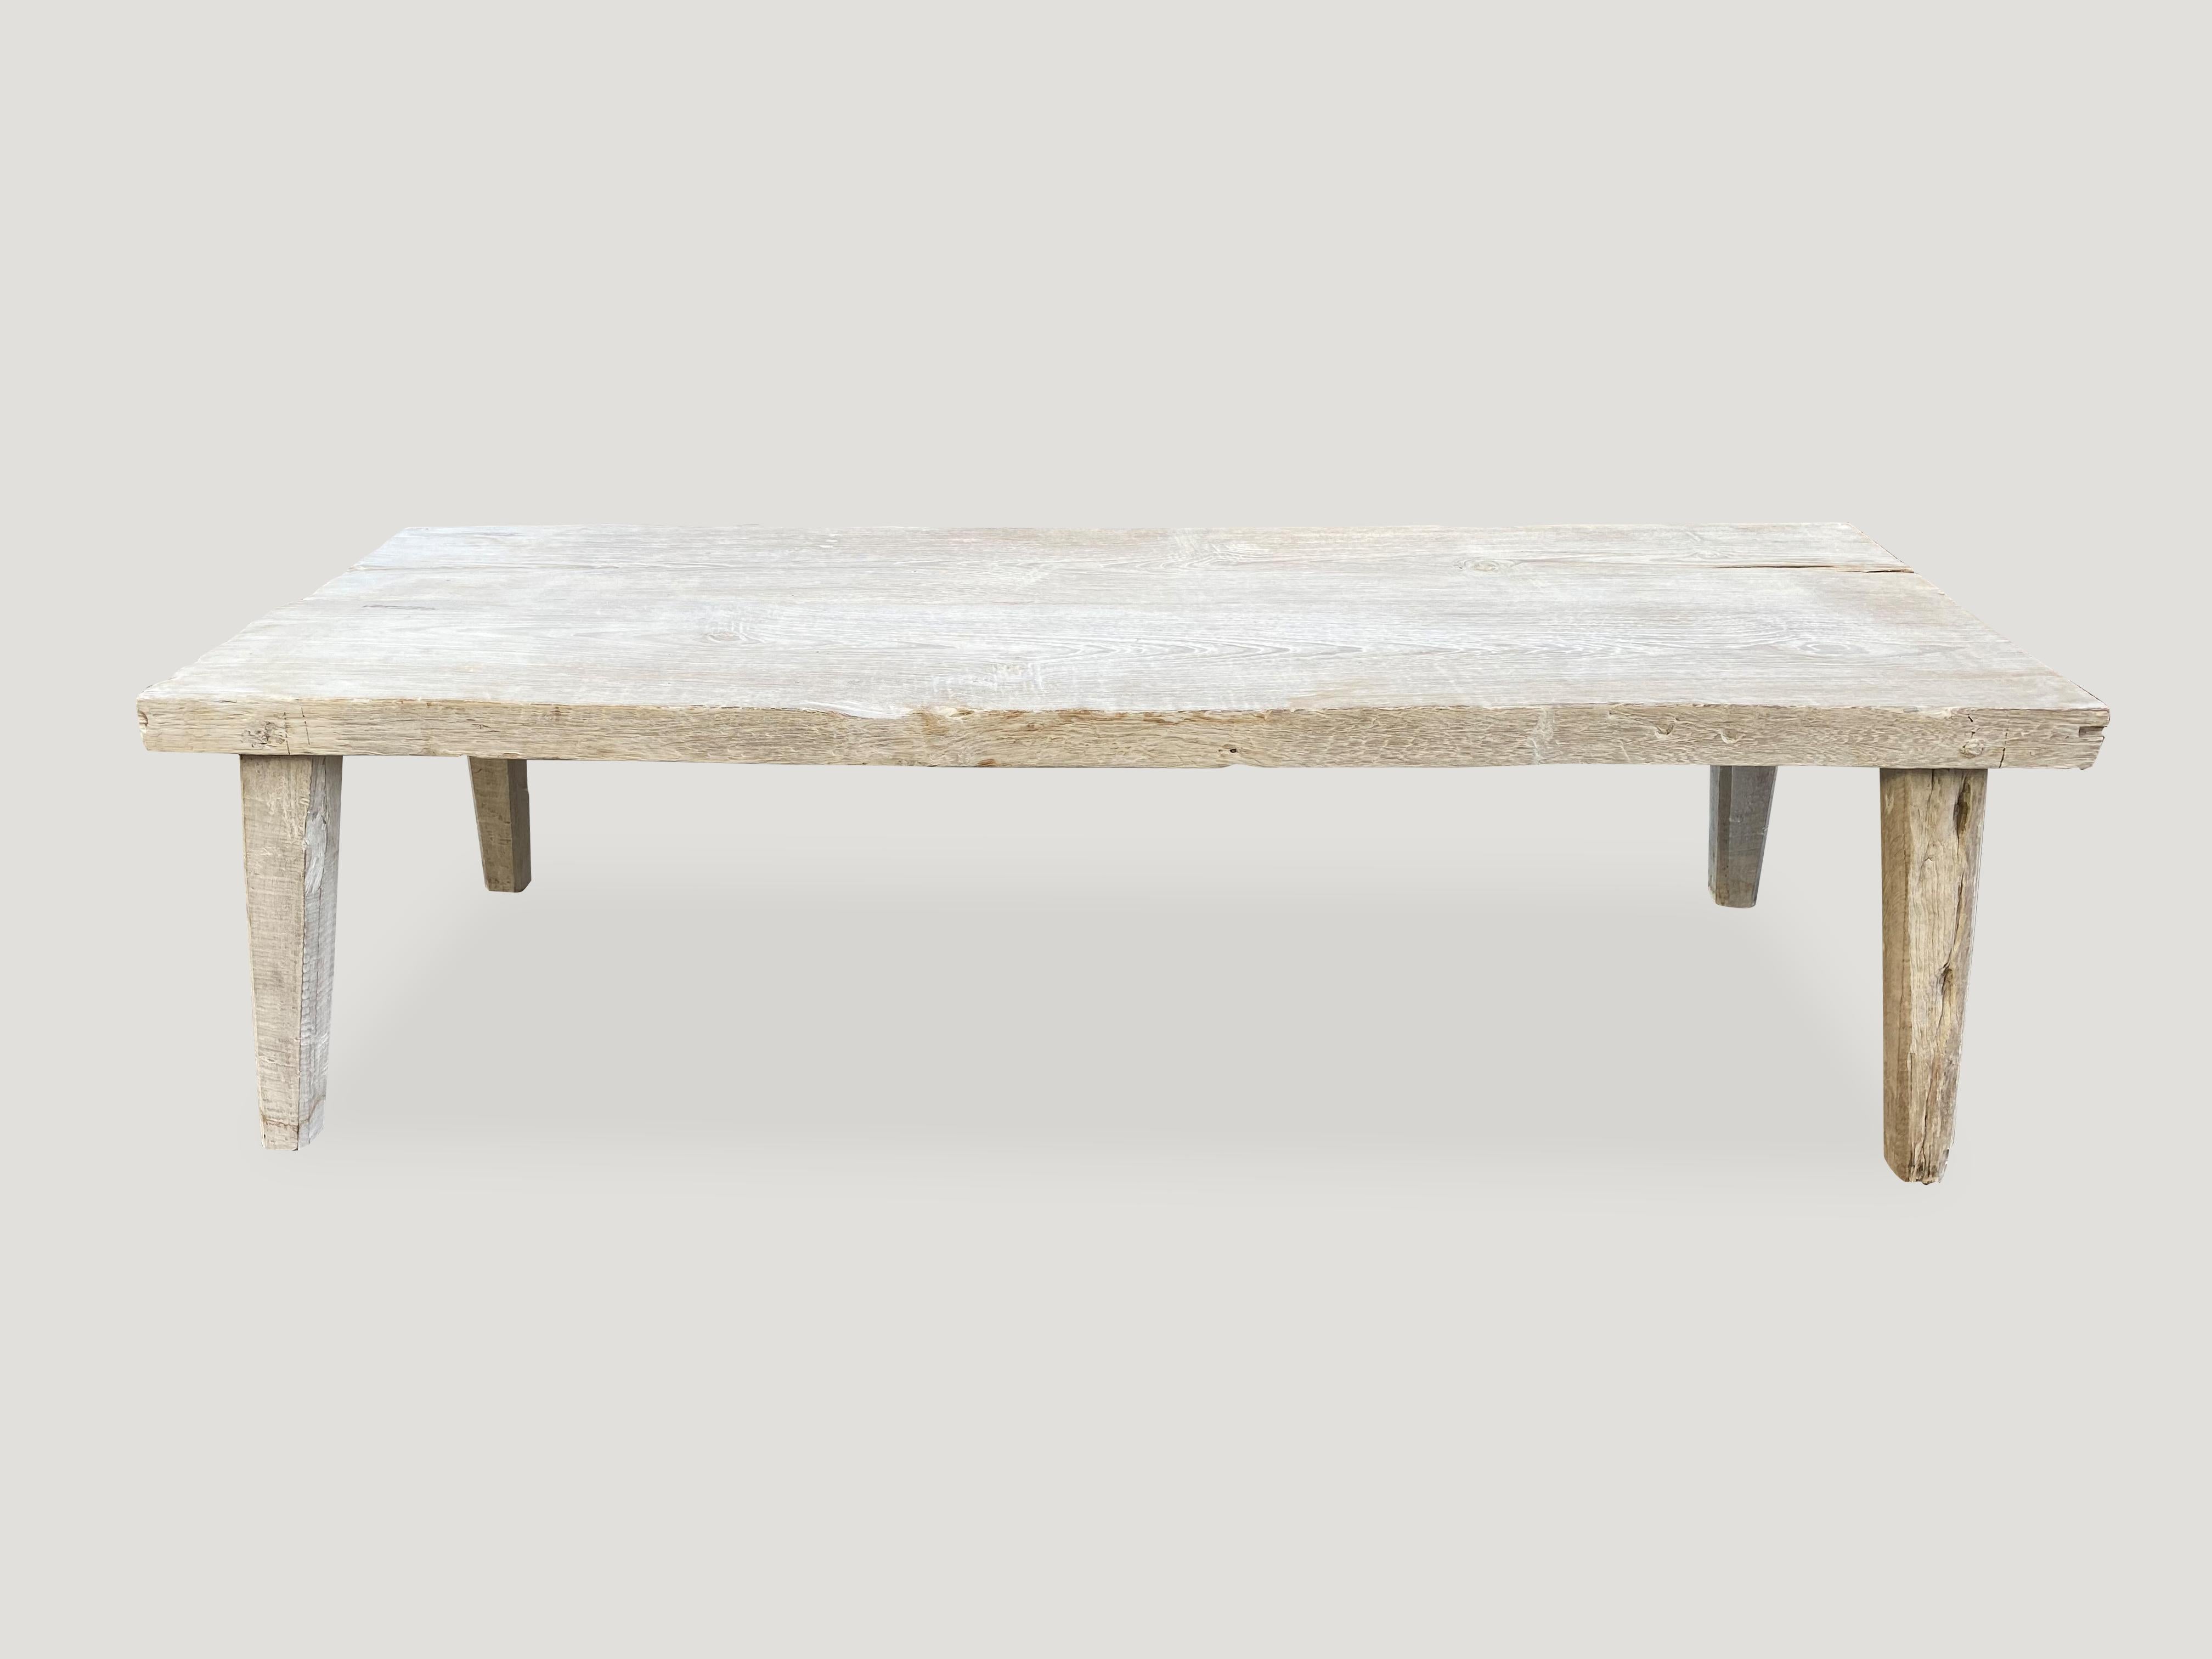 Beautiful Minimalist bench or coffee table, bleached with a light white wash finish. The top is made from a single two inch thick reclaimed teak panel.

The St. Barts collection features an exciting new line of organic white wash, bleached and